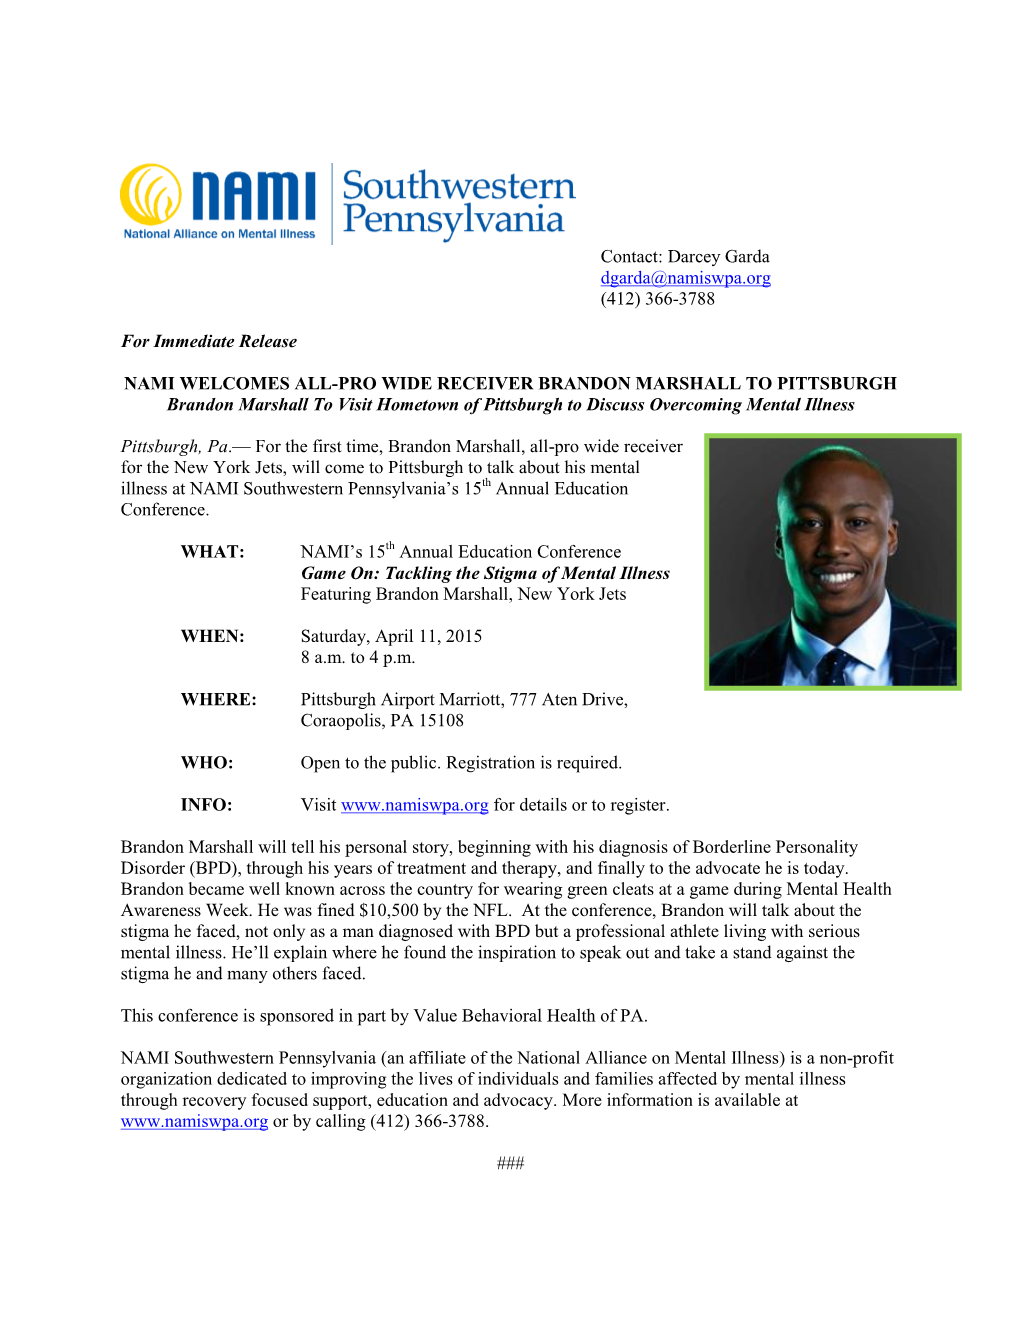 NAMI WELCOMES ALL-PRO WIDE RECEIVER BRANDON MARSHALL to PITTSBURGH Brandon Marshall to Visit Hometown of Pittsburgh to Discuss Overcoming Mental Illness